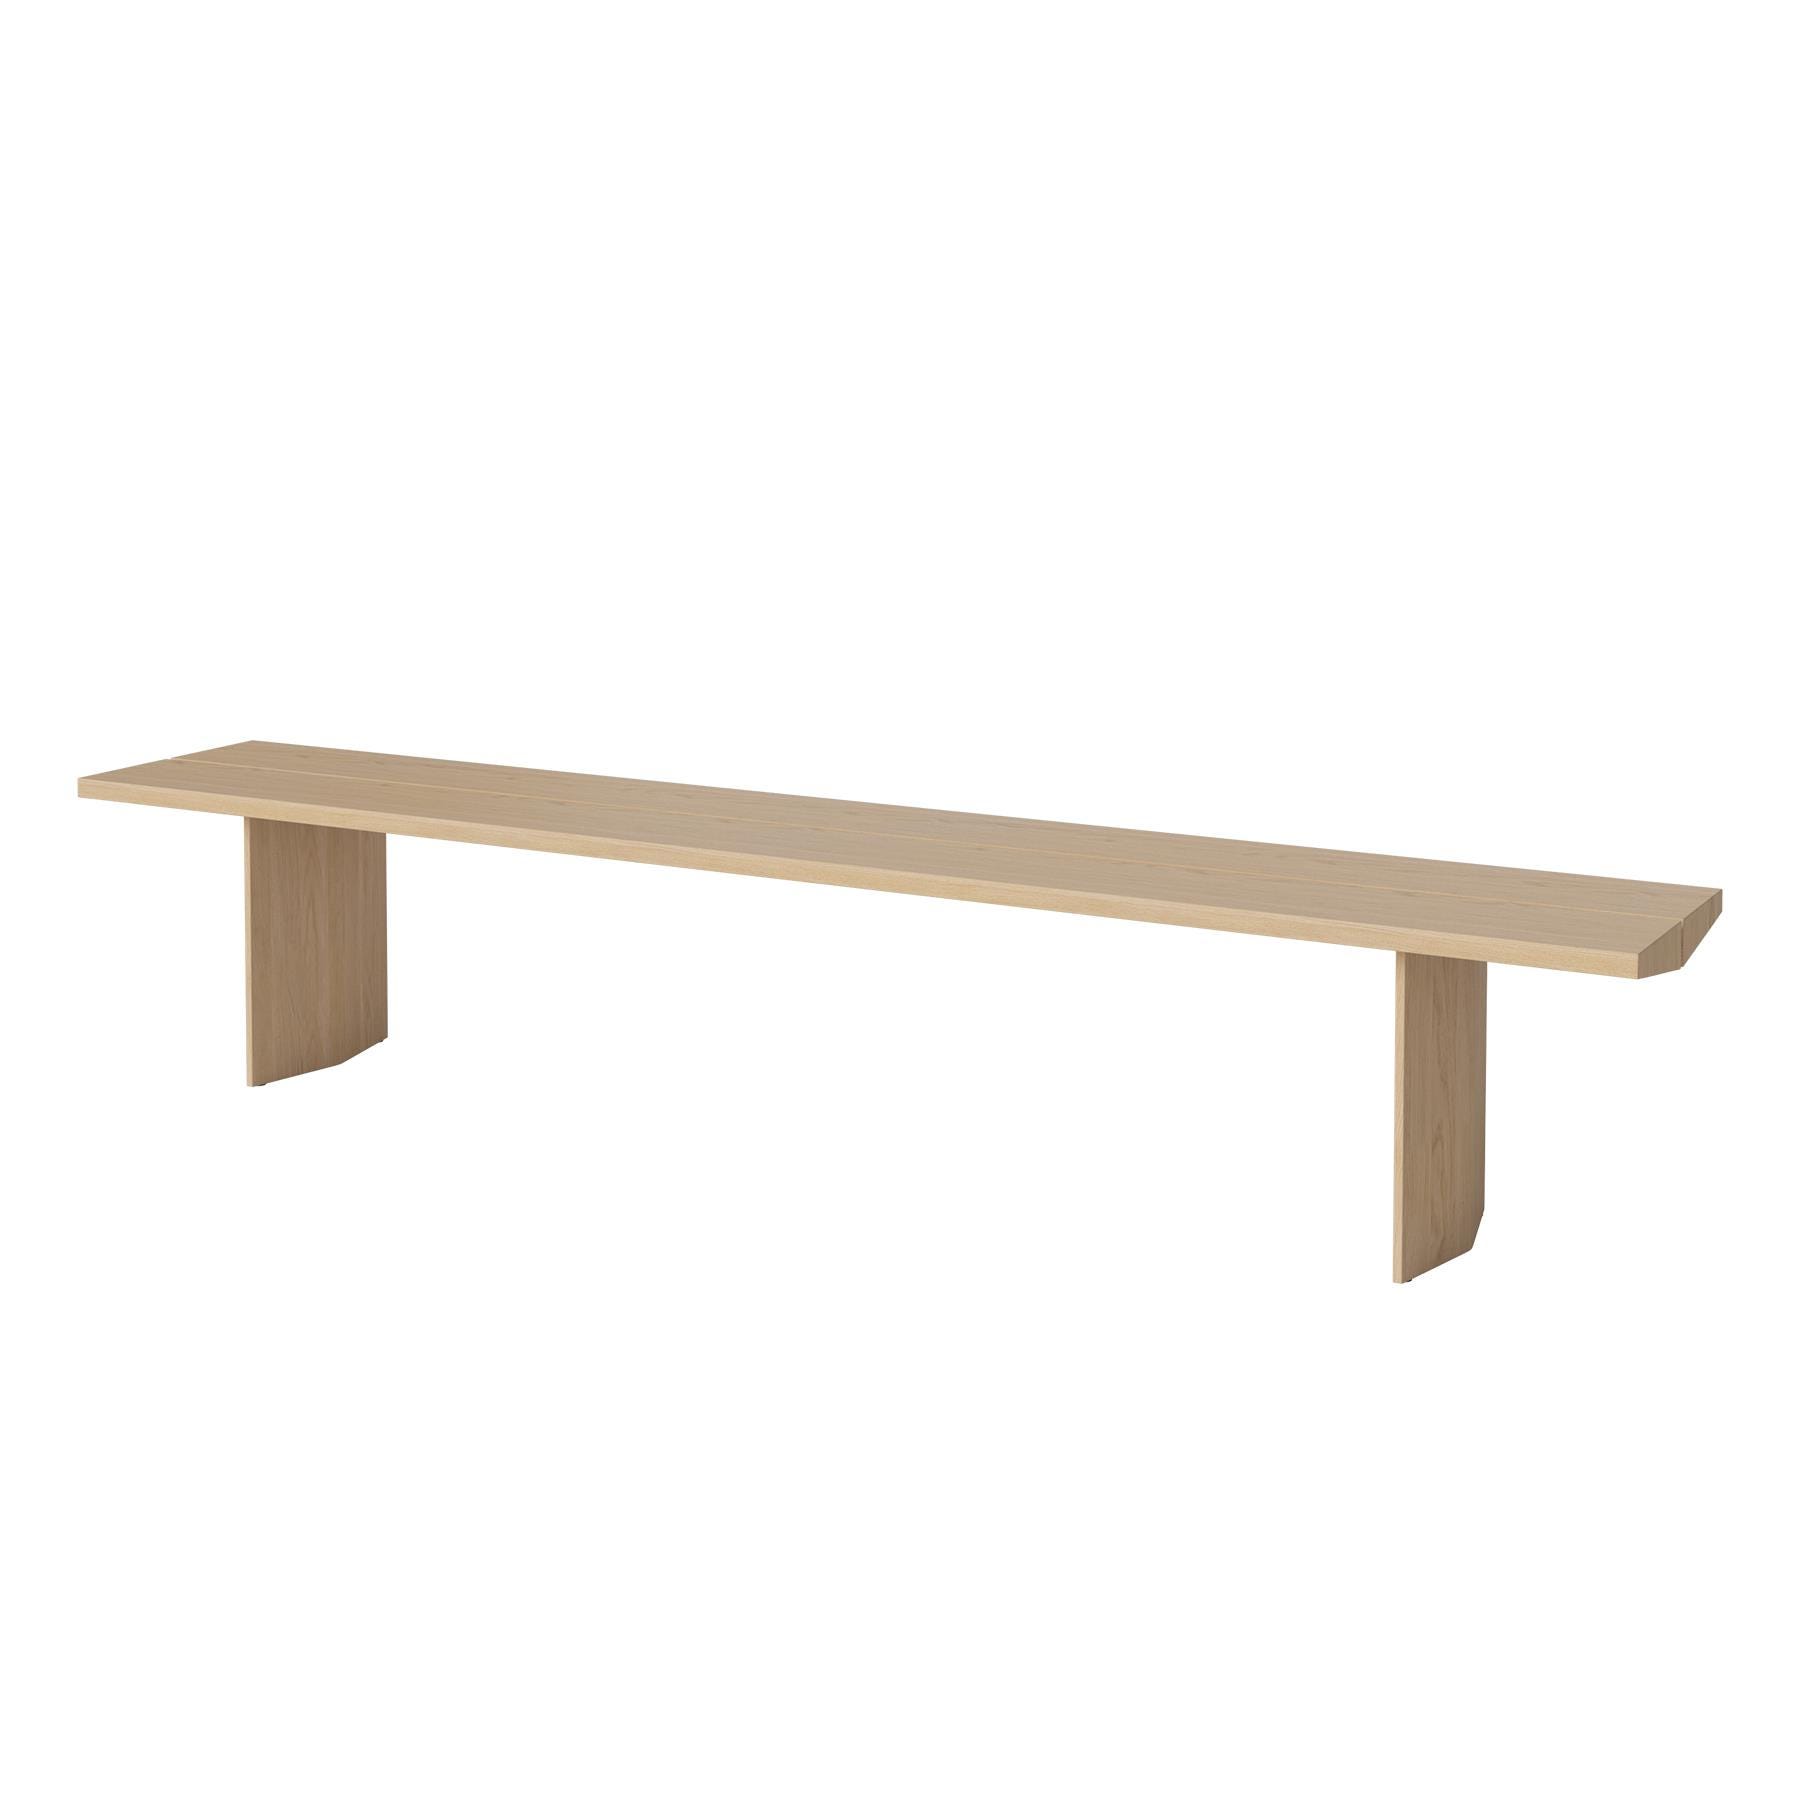 Bolia Alp Dining Bench White Oiled Oak Lenghth 240cm Light Wood Designer Furniture From Holloways Of Ludlow